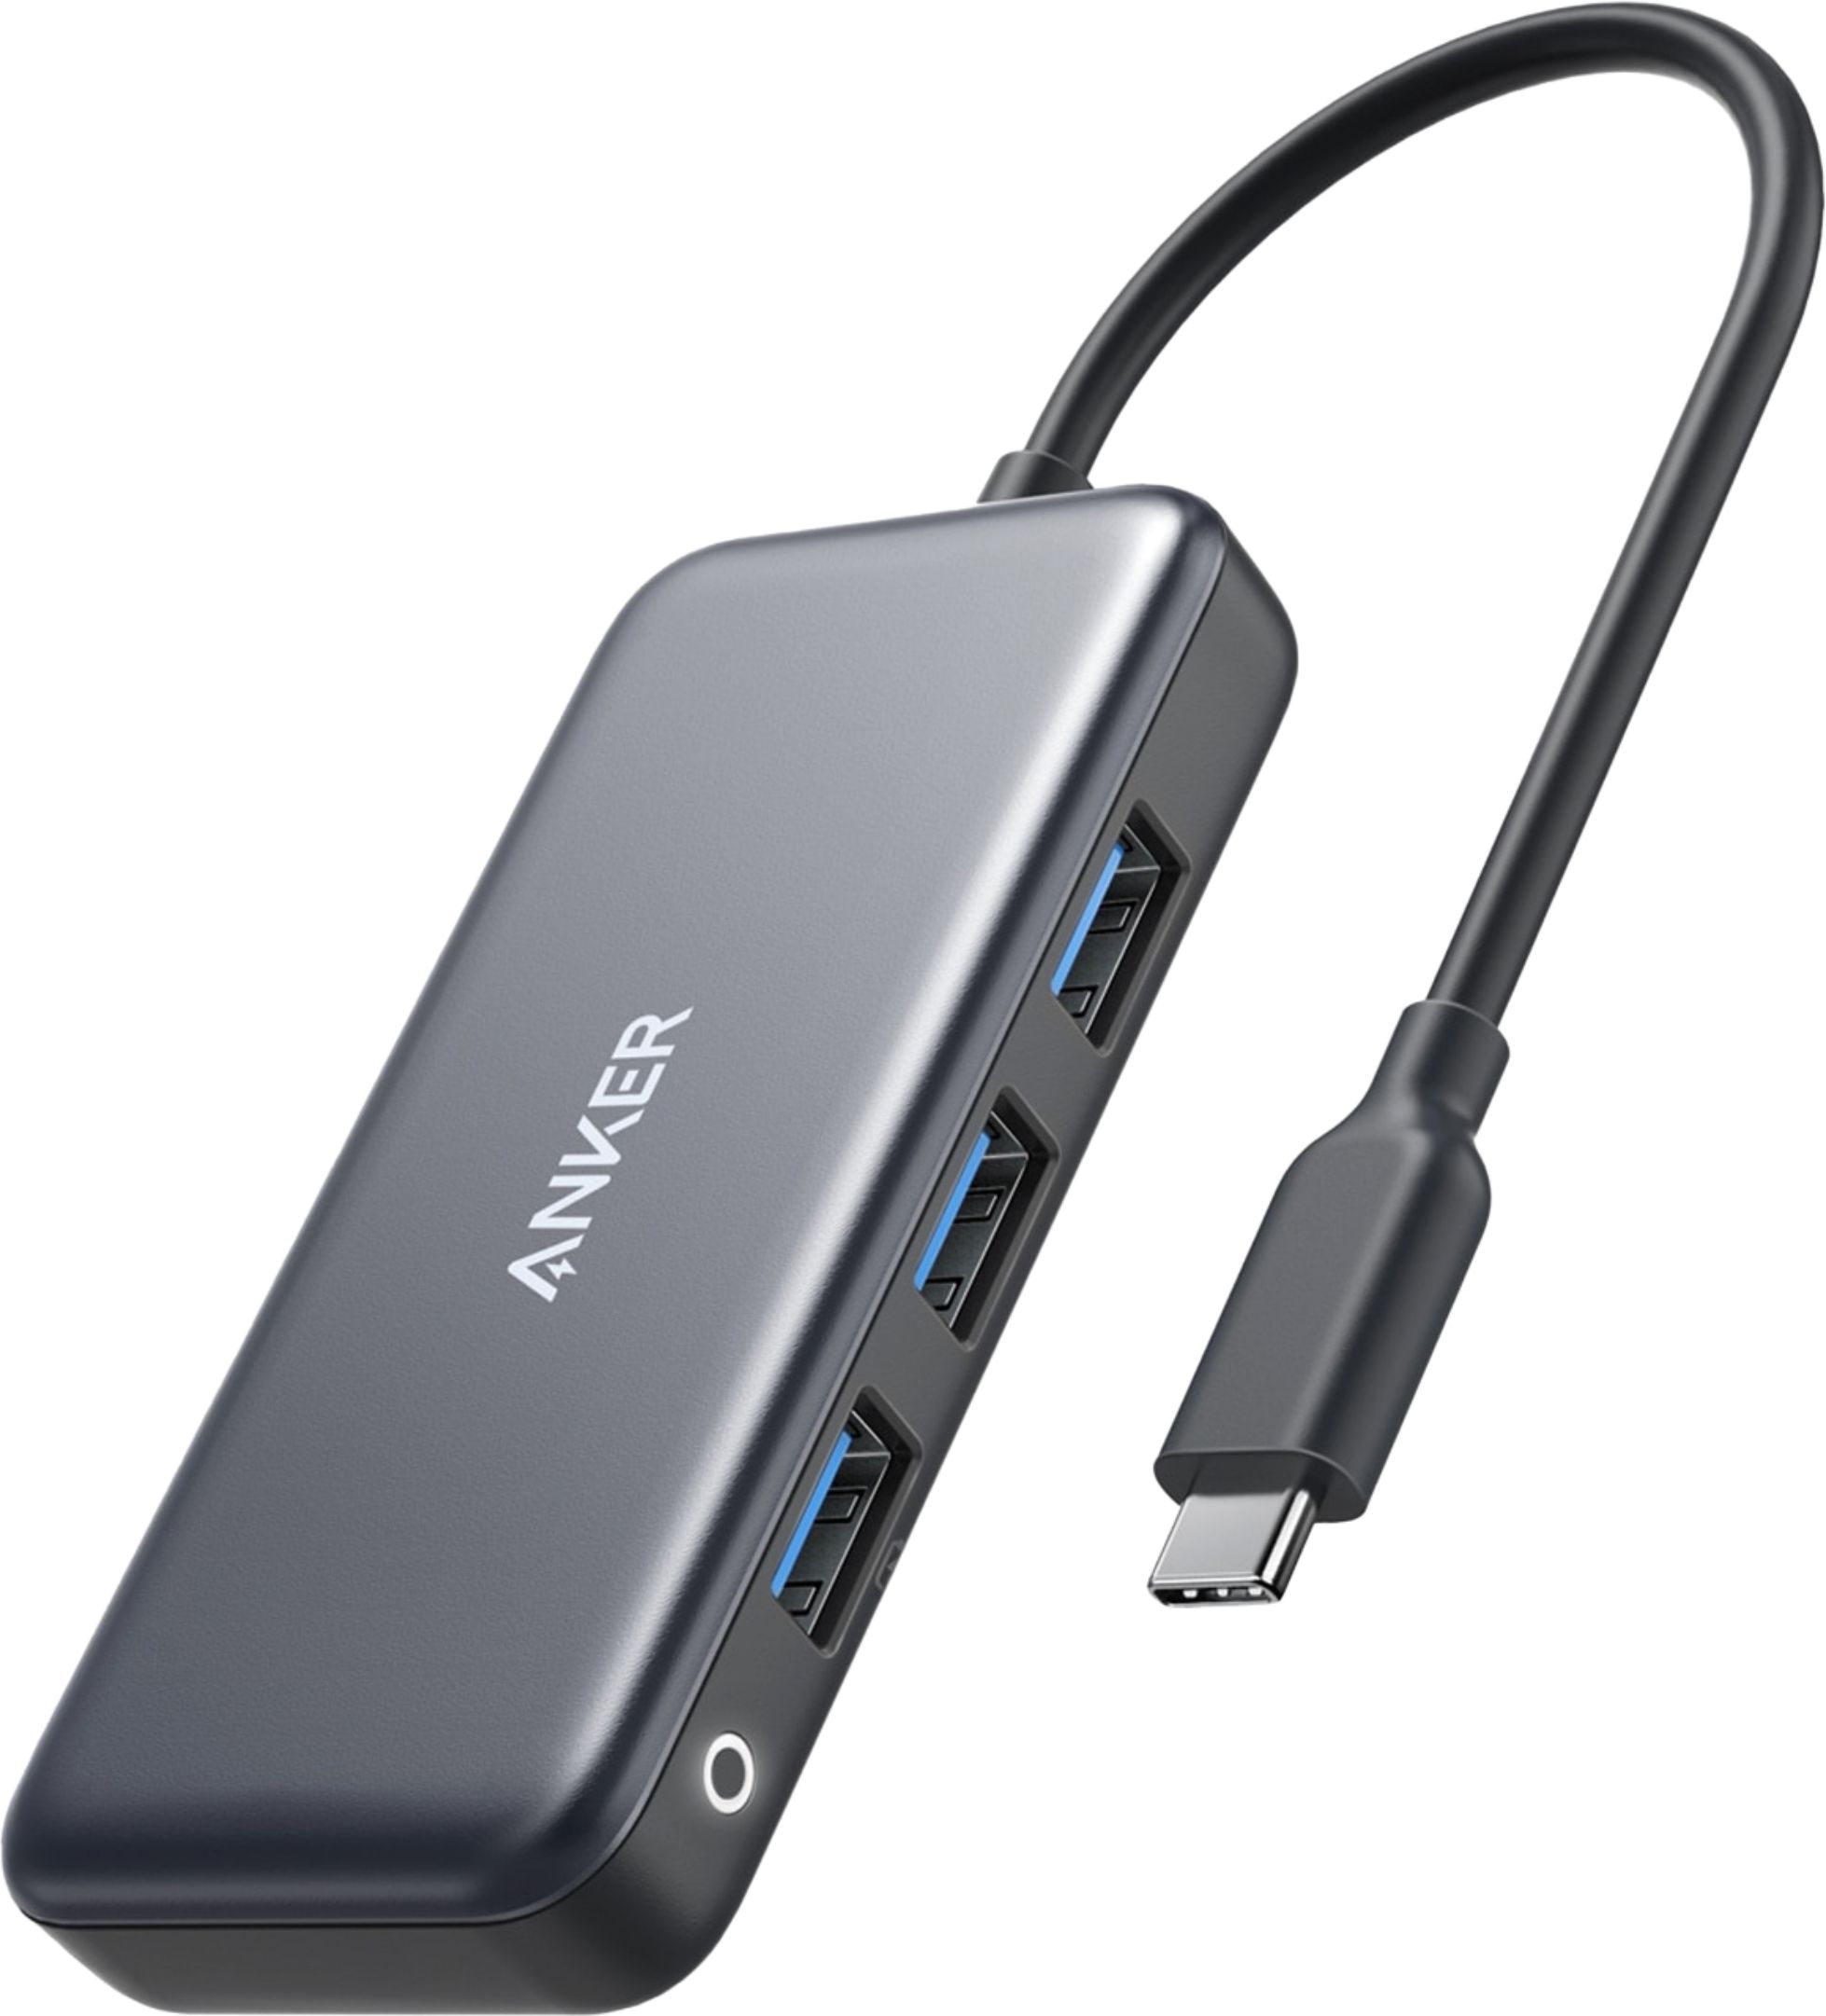 Anker USB C Hub, 341 USB-C Hub (7-in-1) with 4K HDMI, 100W Power Delivery,  USB-C and 2 USB-A 5 Gbps Data Ports, microSD and SD Card Reader, for